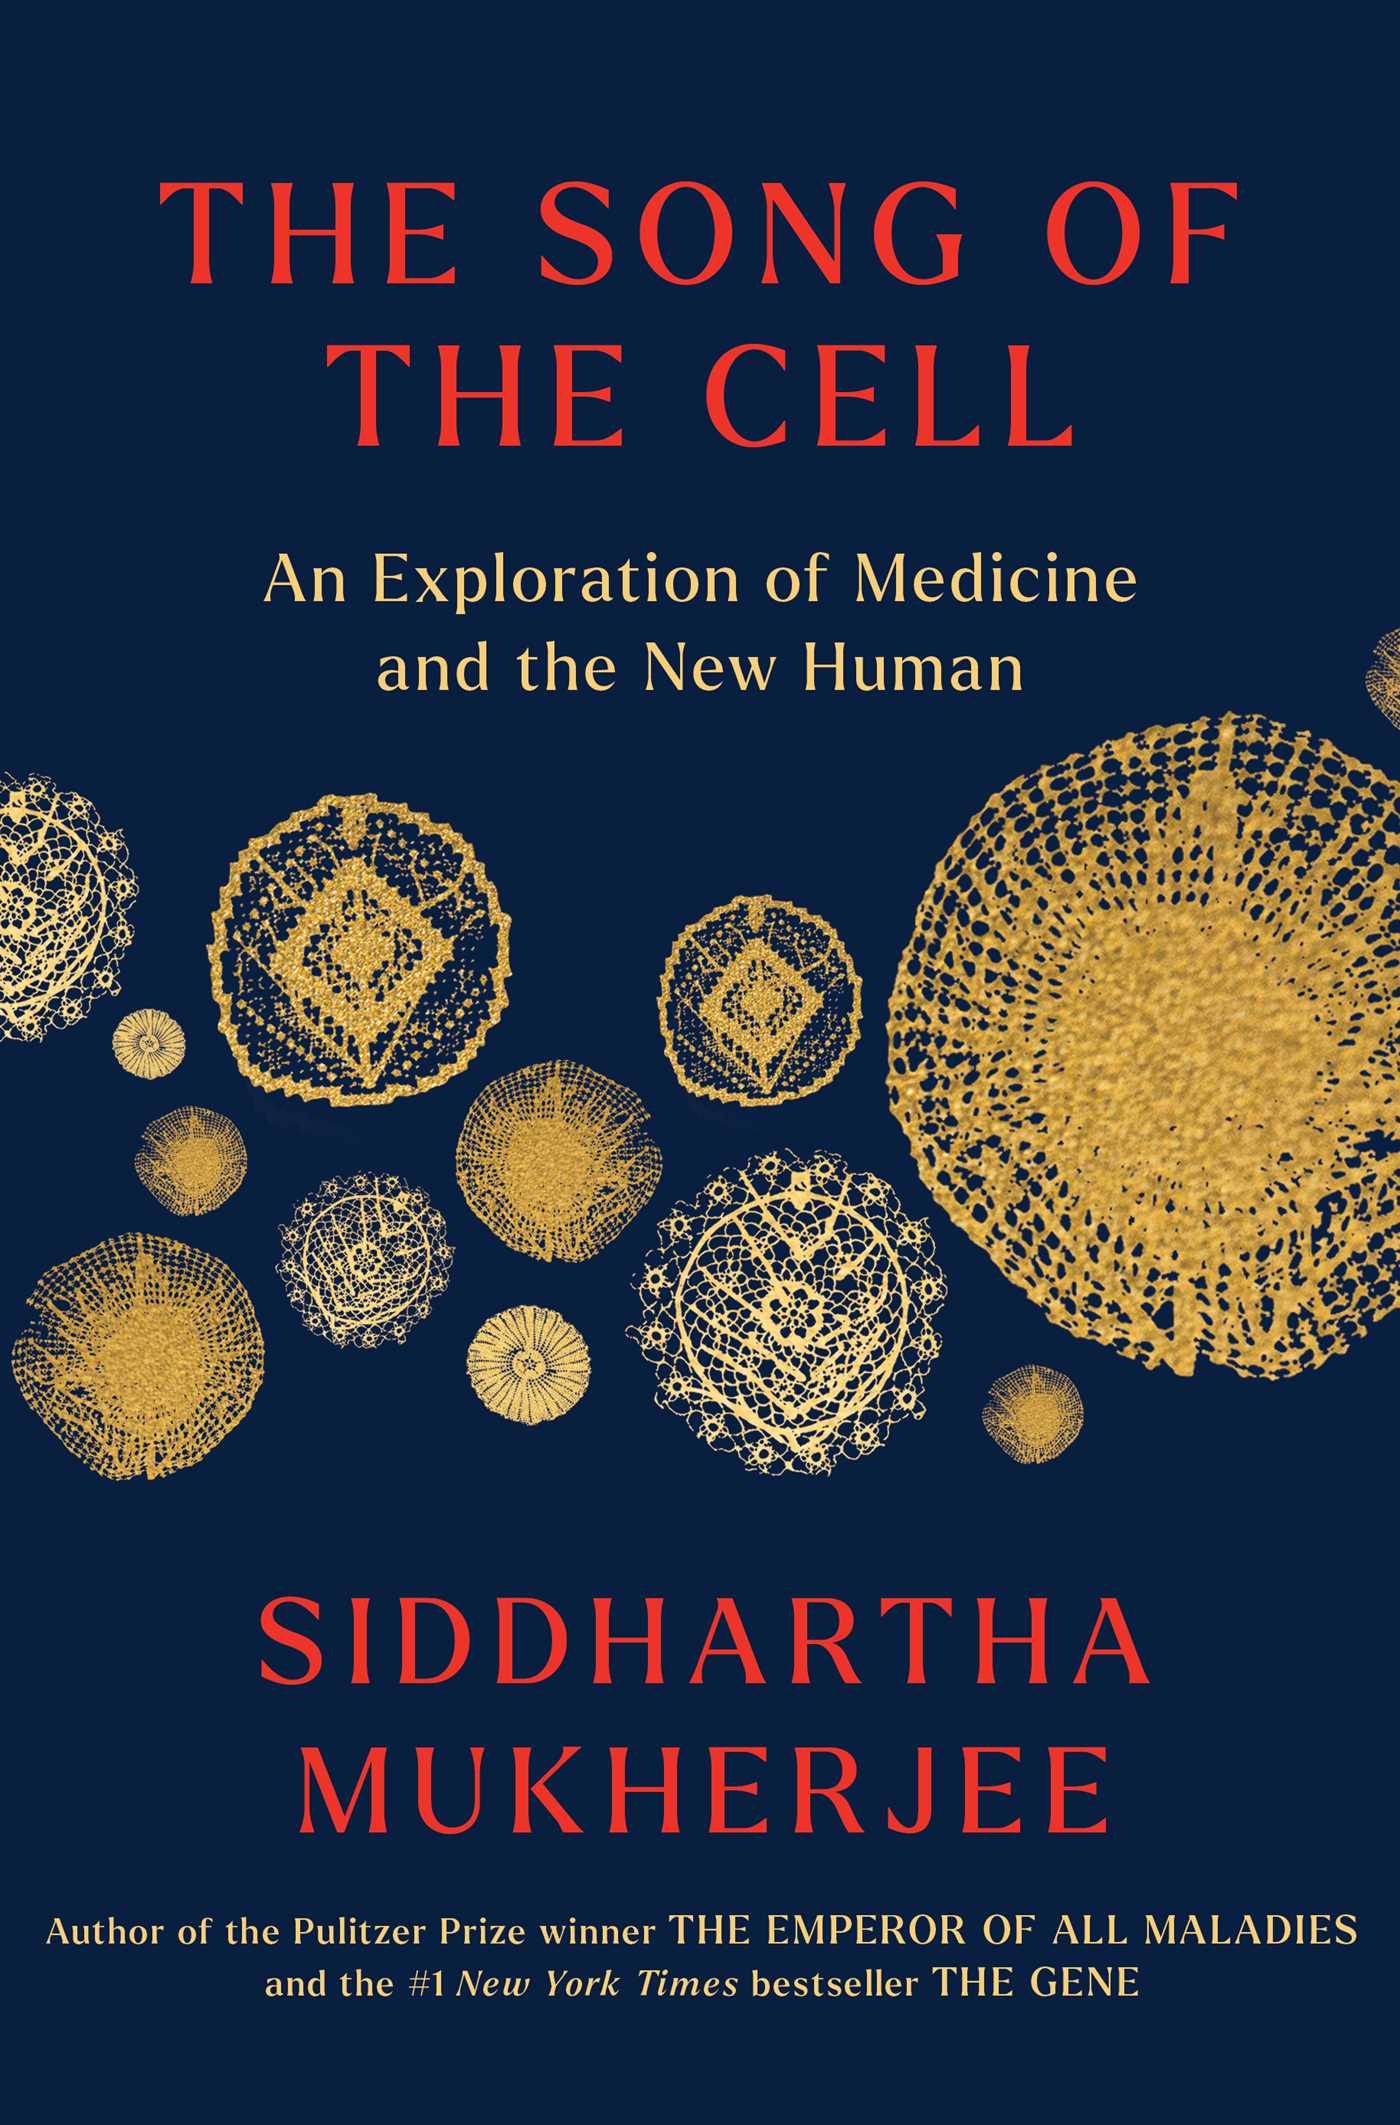 The Song of the Cell : An Exploration of Medicine and the New Human | Mukherjee, Siddhartha